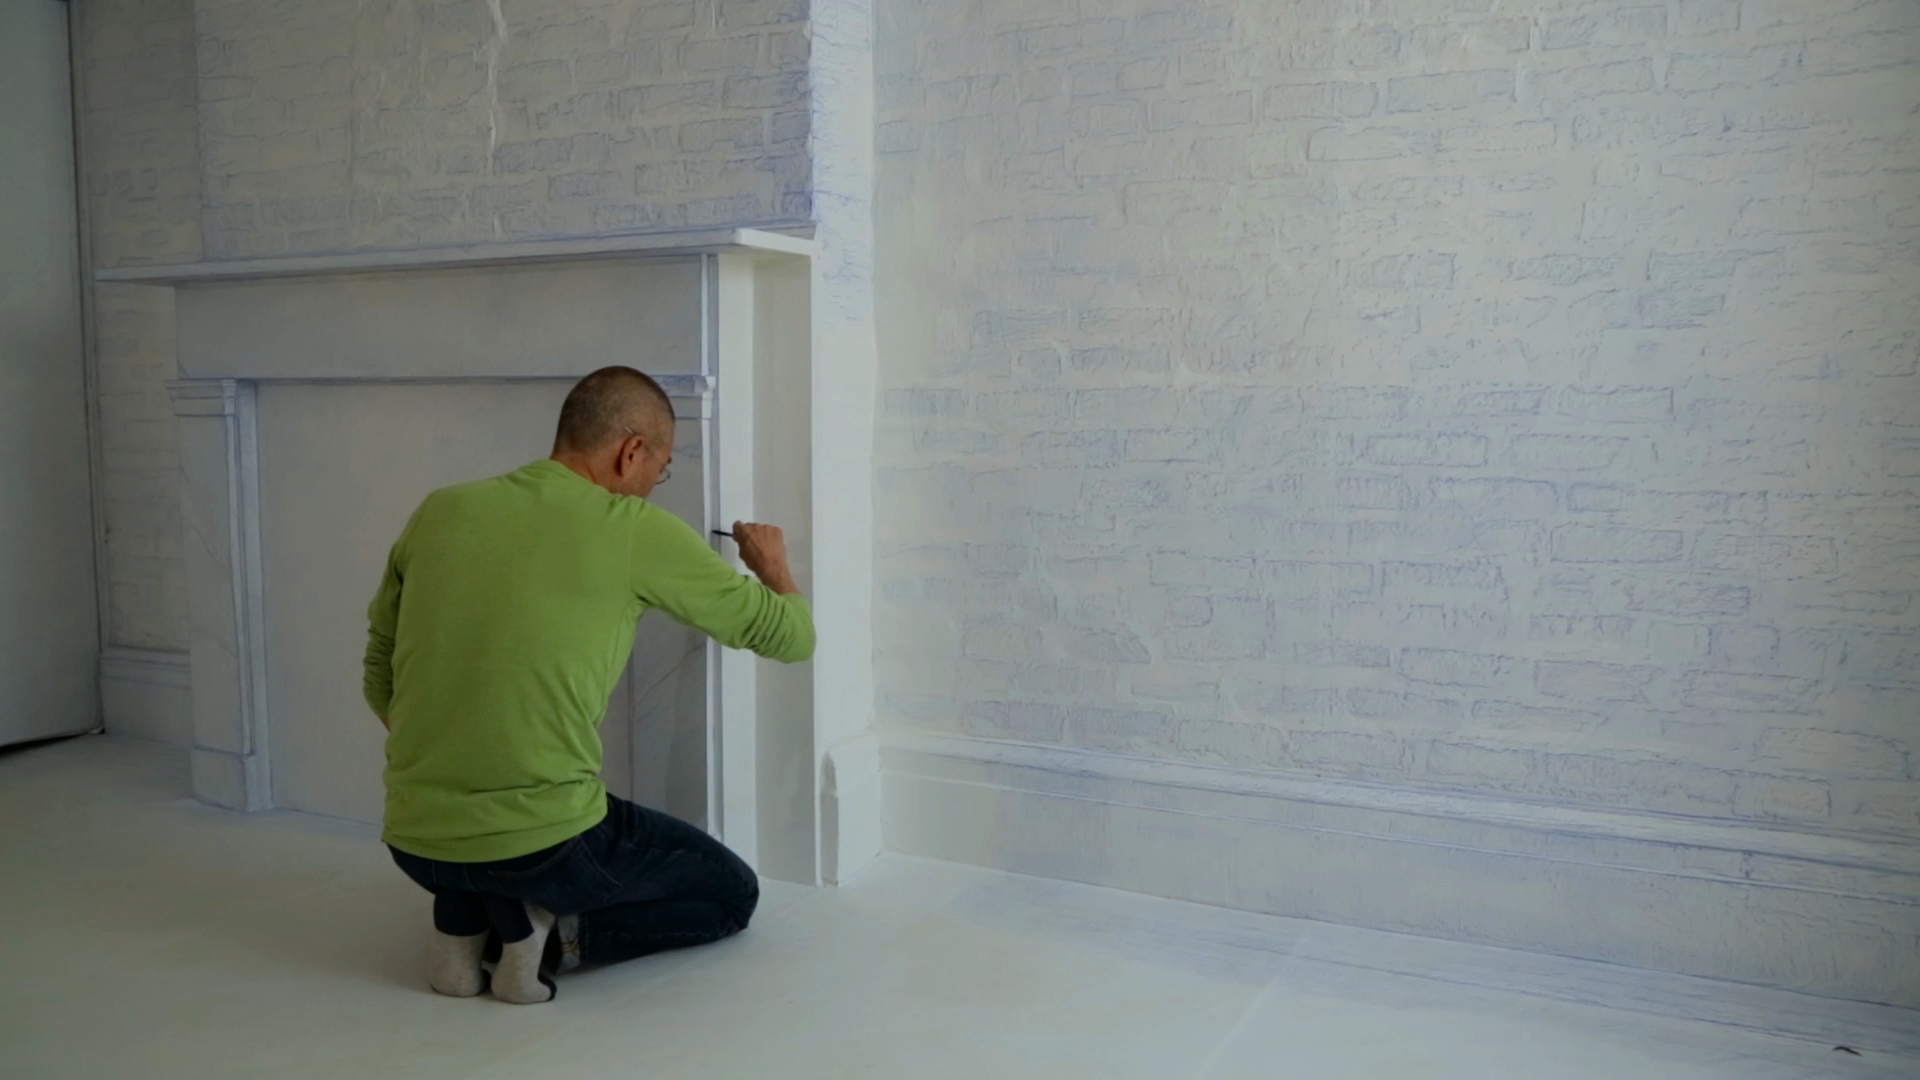 Do Ho Suh at work on Rubbing/Loving in the New York apartment where he lived and worked for eighteen years. Production still from the series Art21 Exclusive. © Art21, Inc. 2016. Cinematography: Ian Forster.